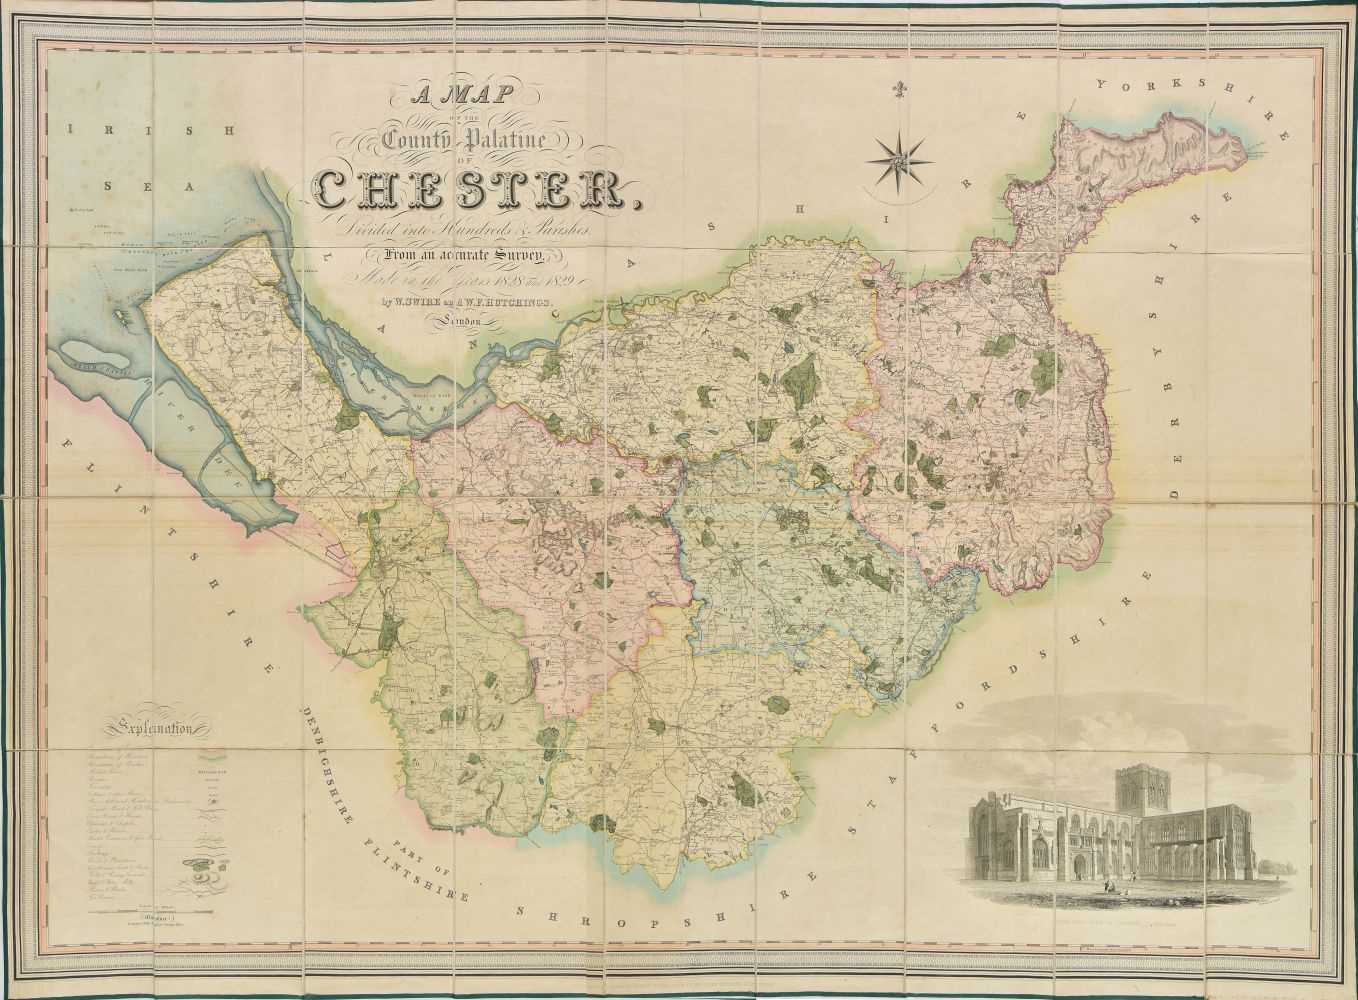 Lot 98 - Cheshire. Swire (W. & Hutchings W. F.). Large scale map. 1830